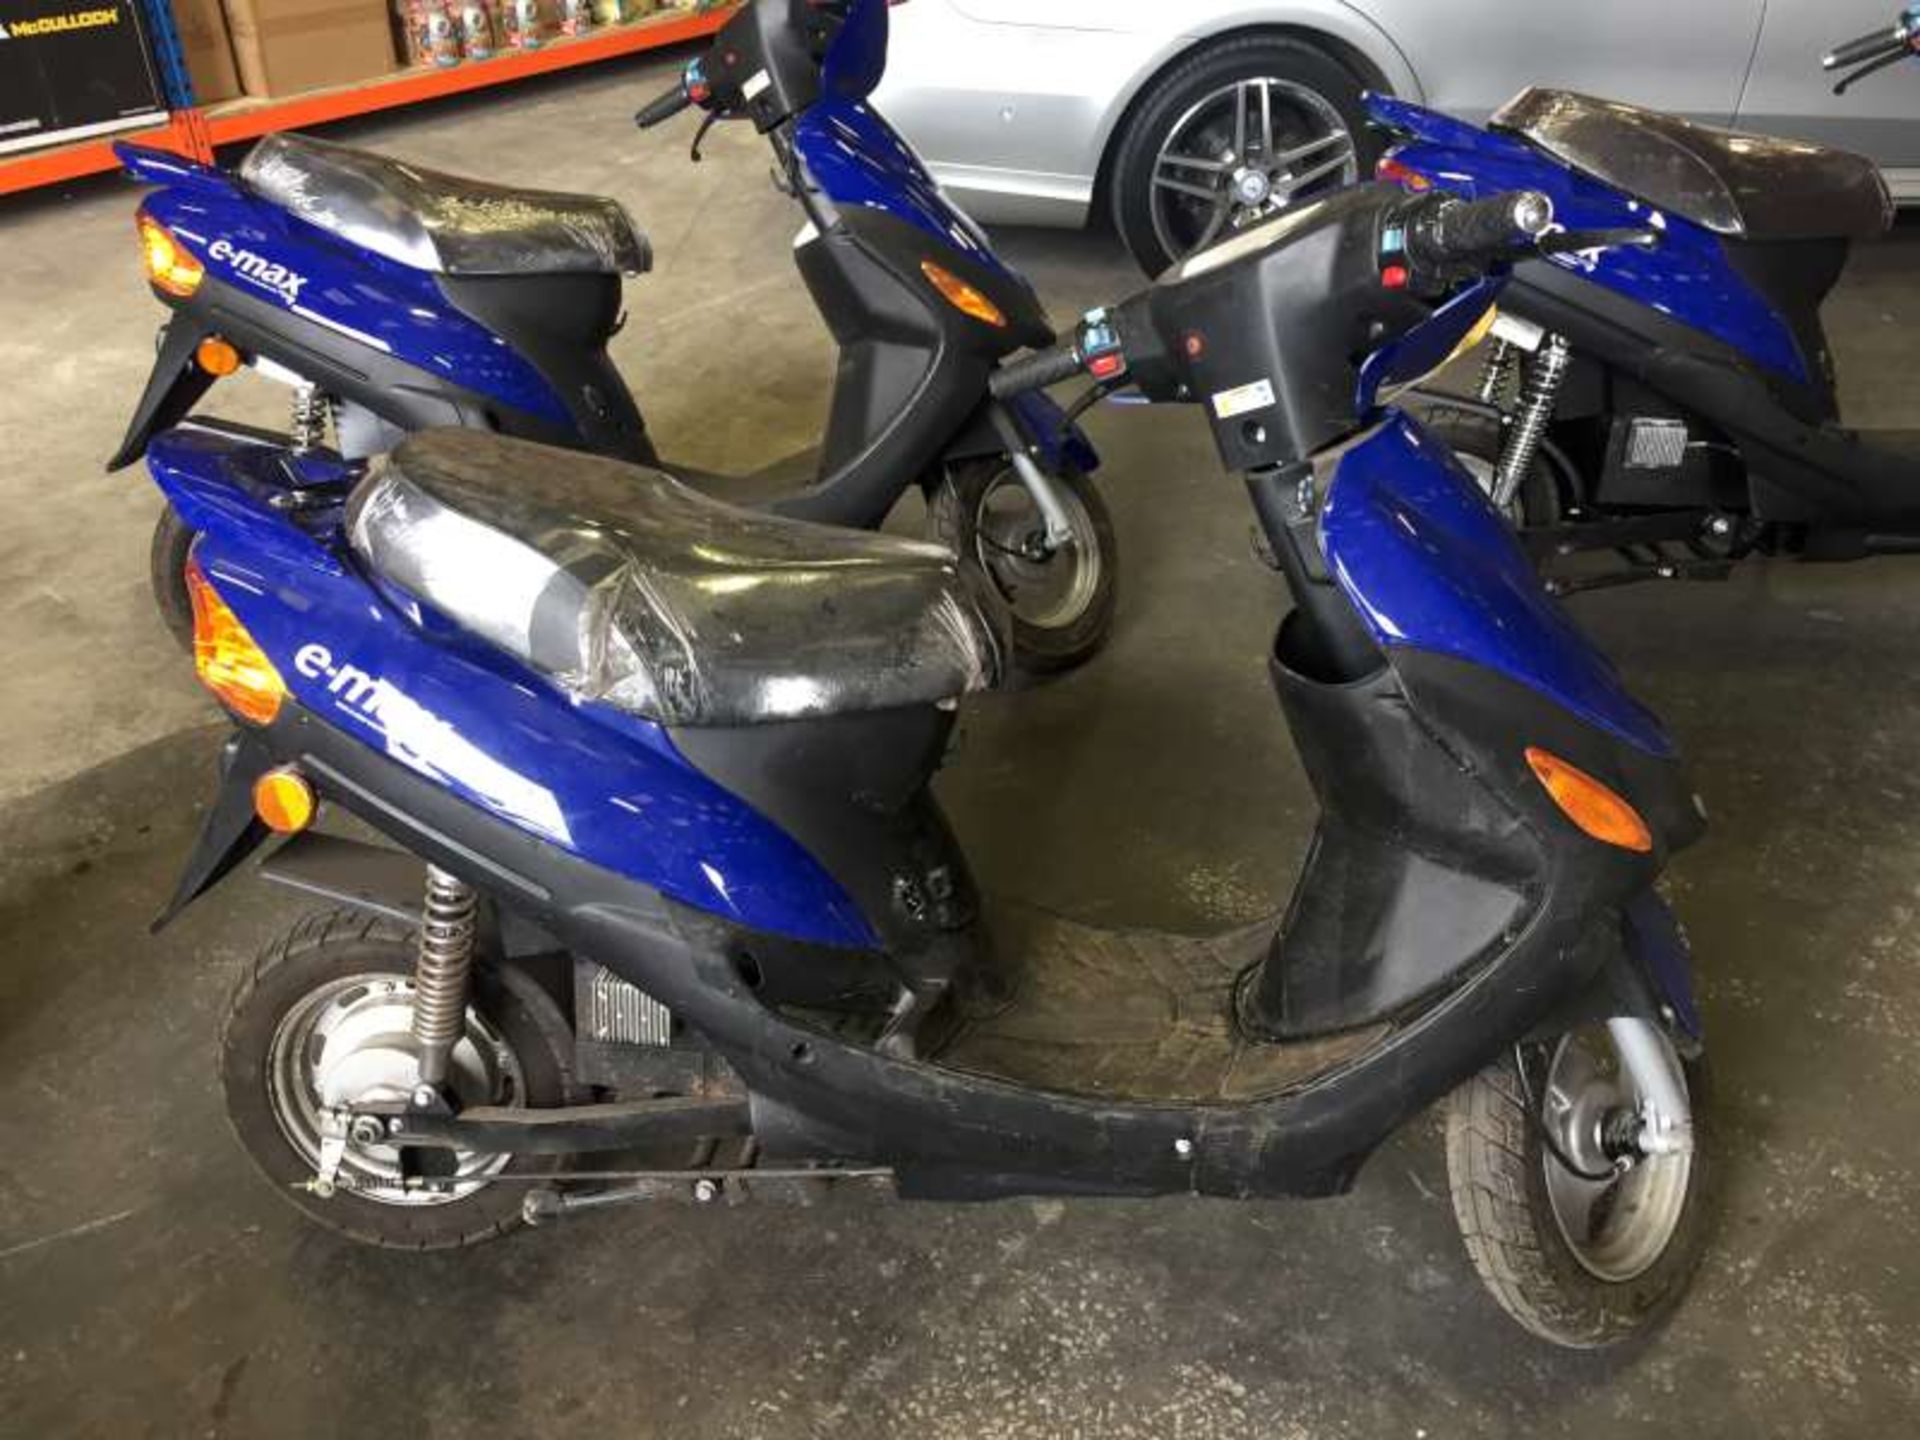 BLUE E-MAX. ( ELECTRIC ) Chasis : WGG3EPW155K000555 Mileage : 0 Details: KEYS YES CHARGER YES NO